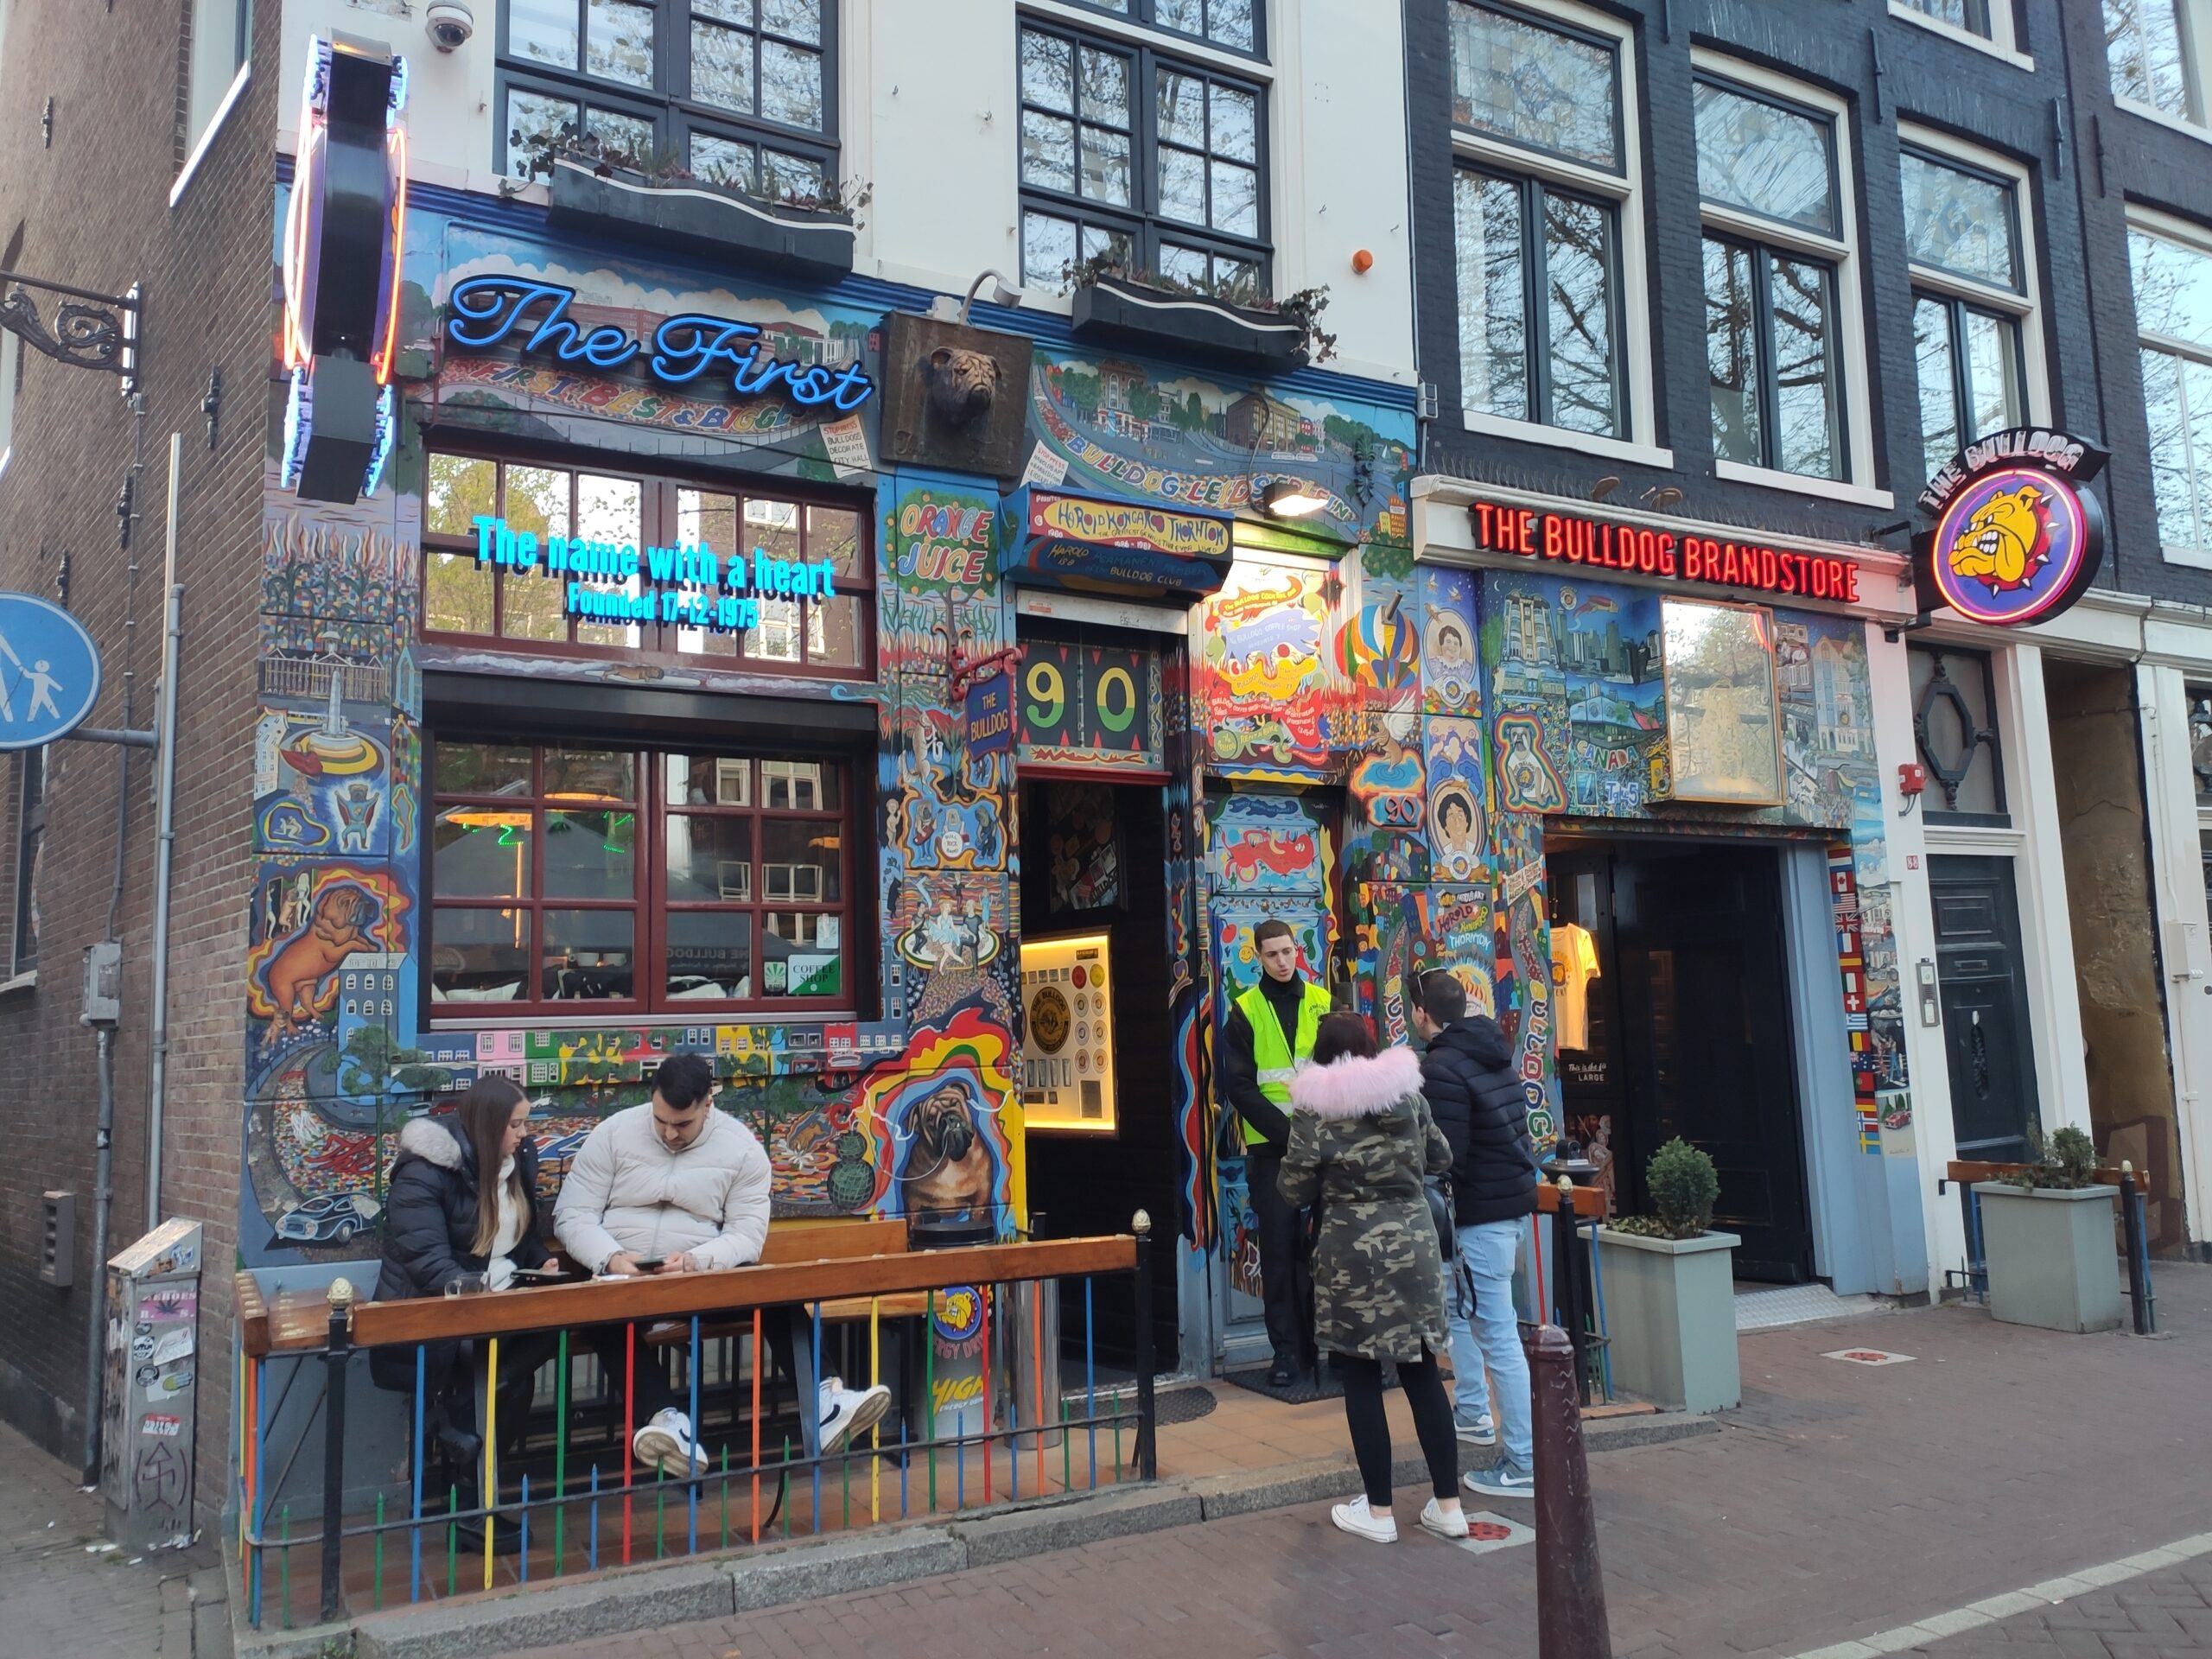 Coffee shops in Amsterdam: how does it works - My traveling cam